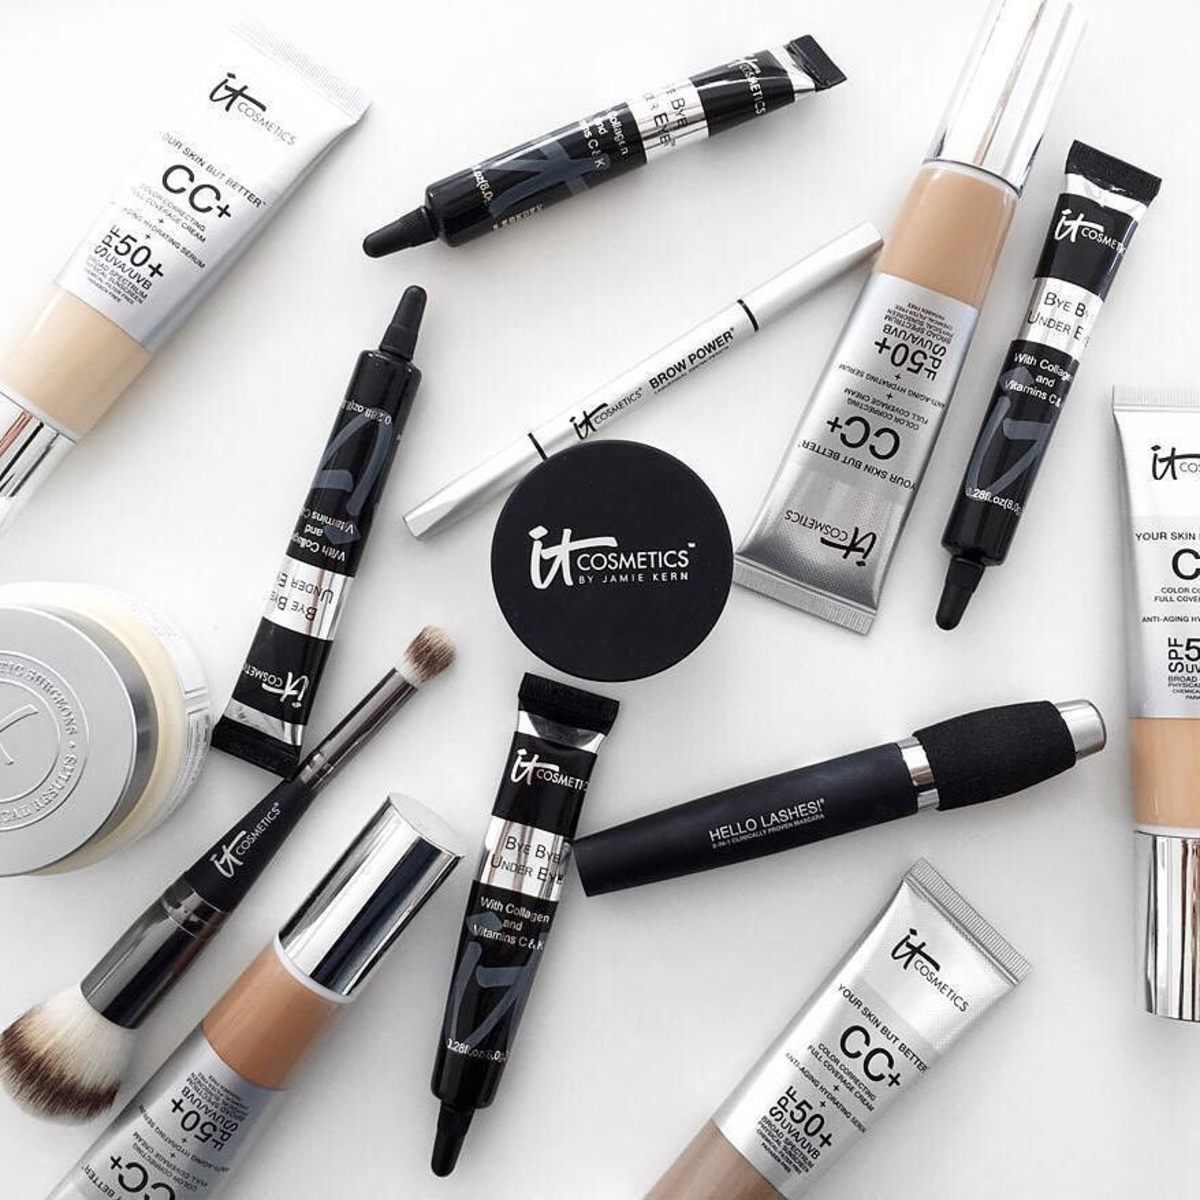 It Cosmetics is now available at Sephora. Photo: @itcosmetics/Instagram